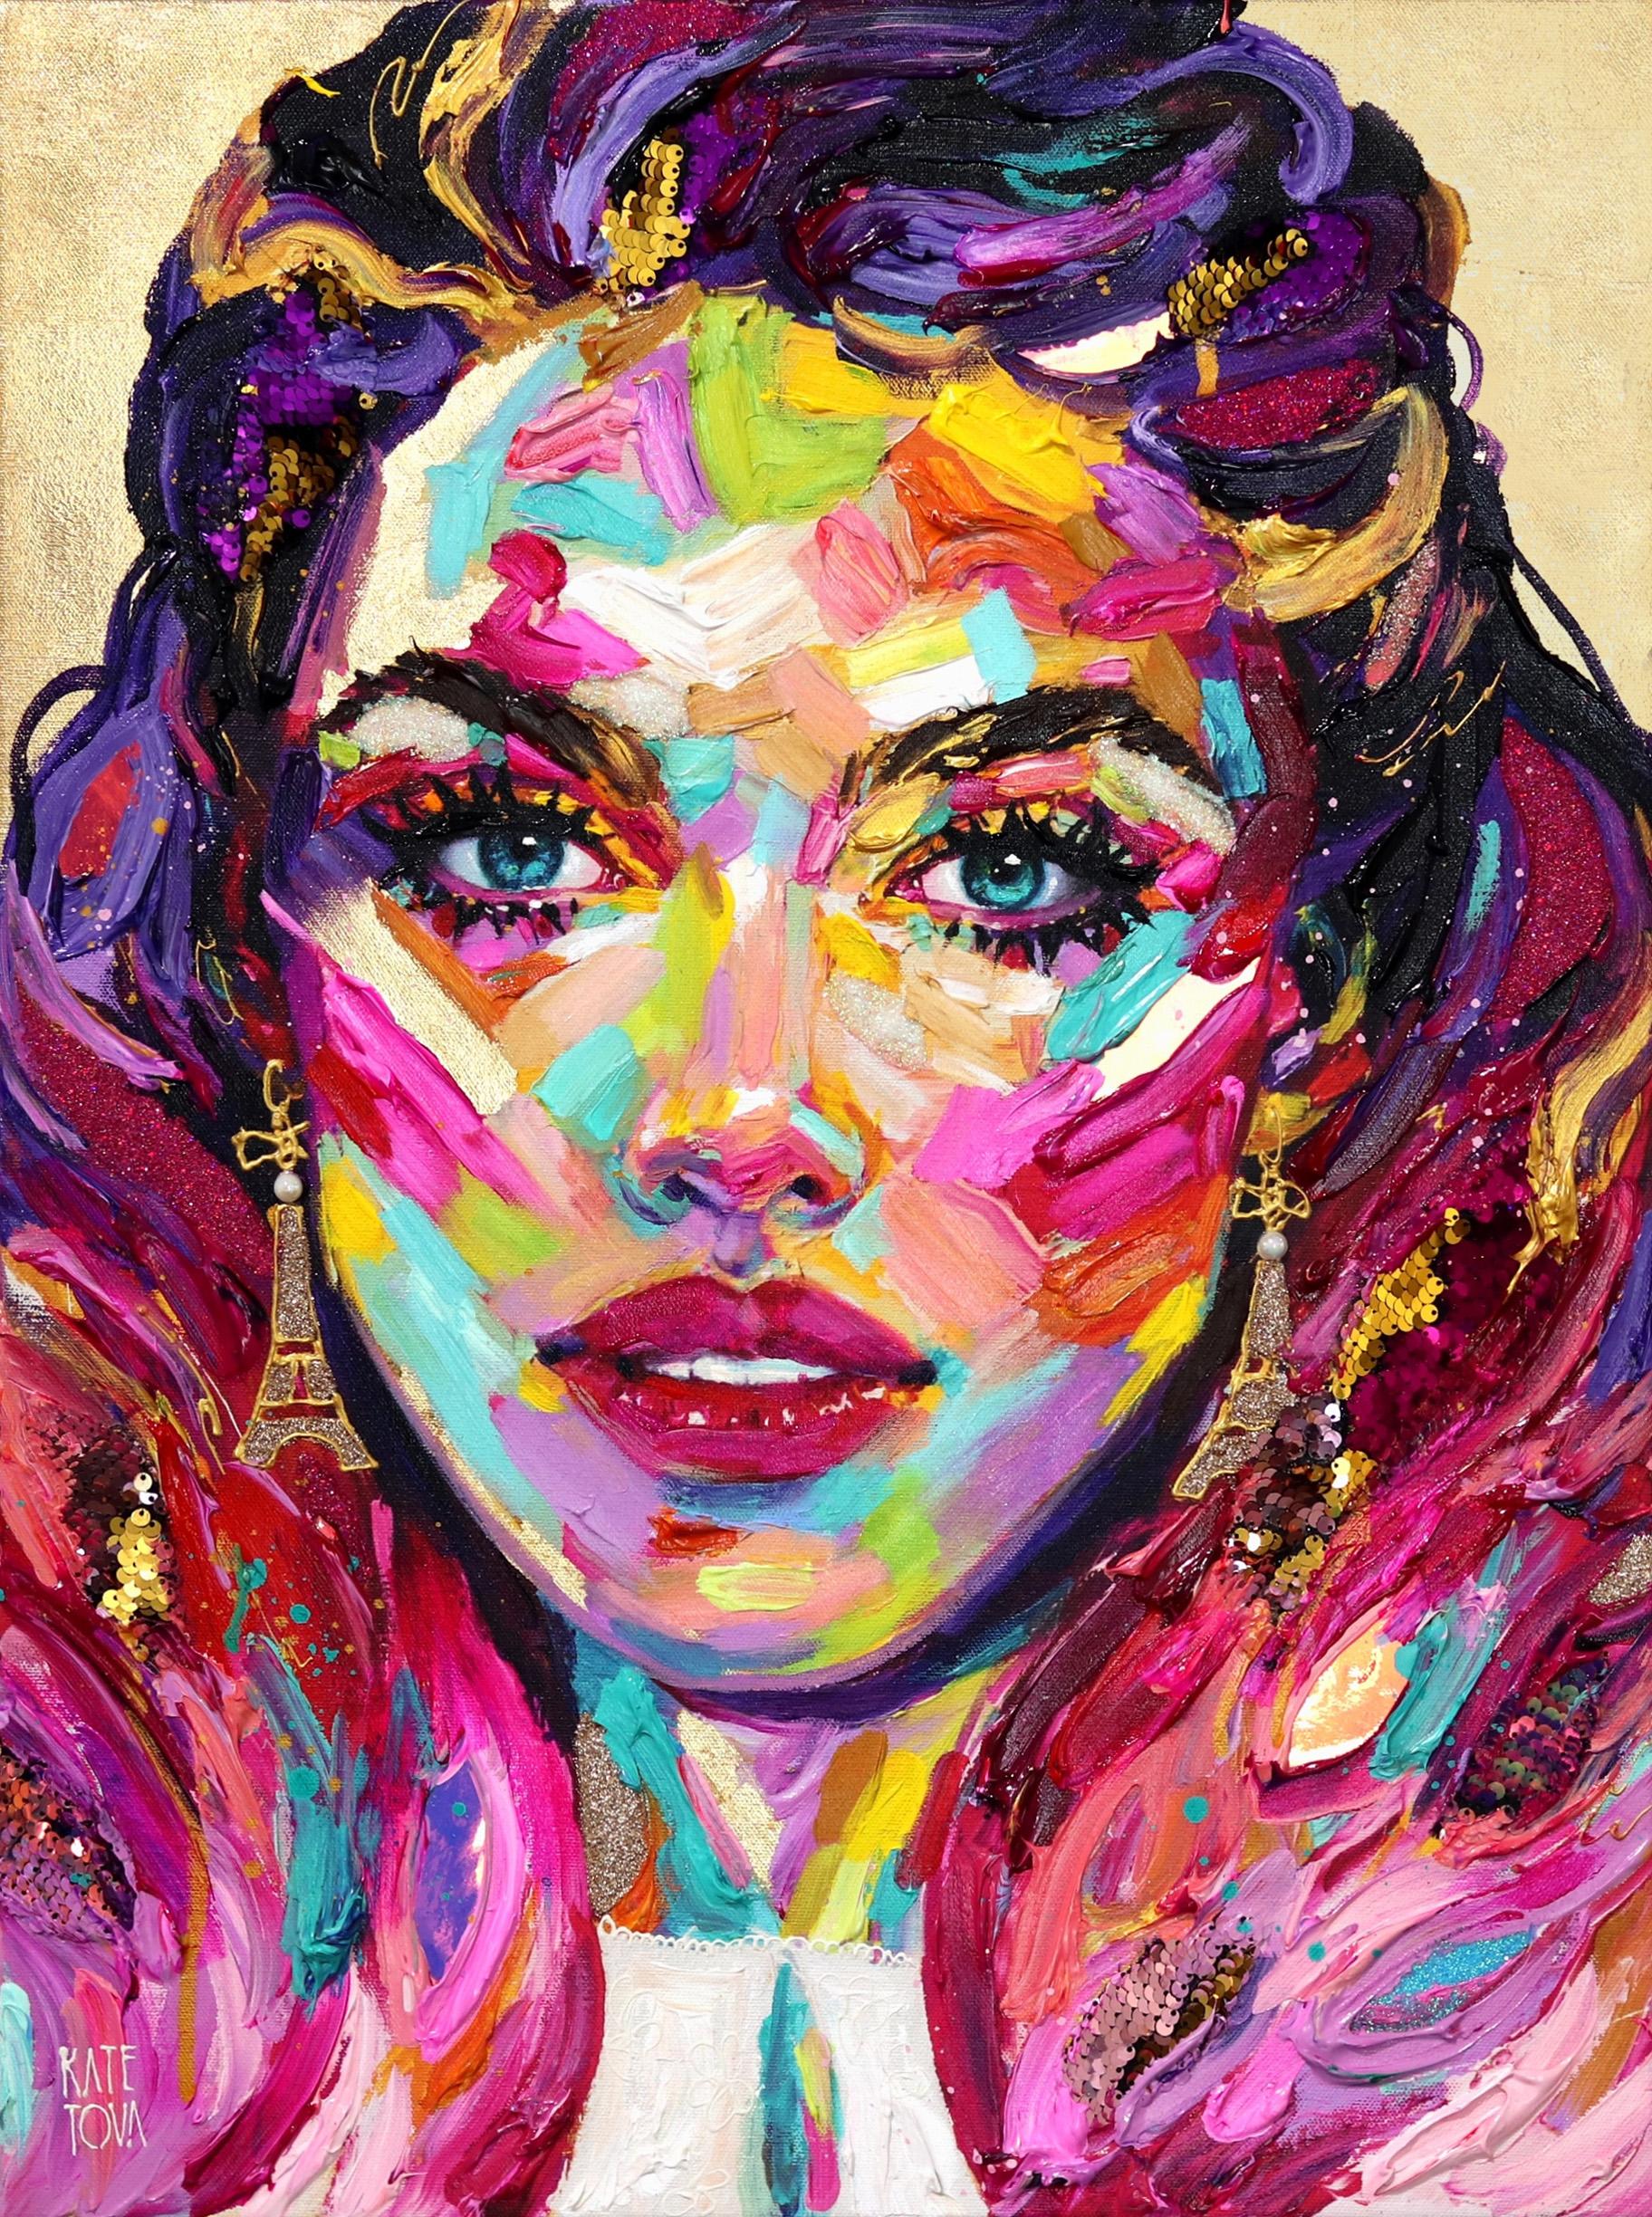 Emily - Colorful Original Figurative Painting on Canvas